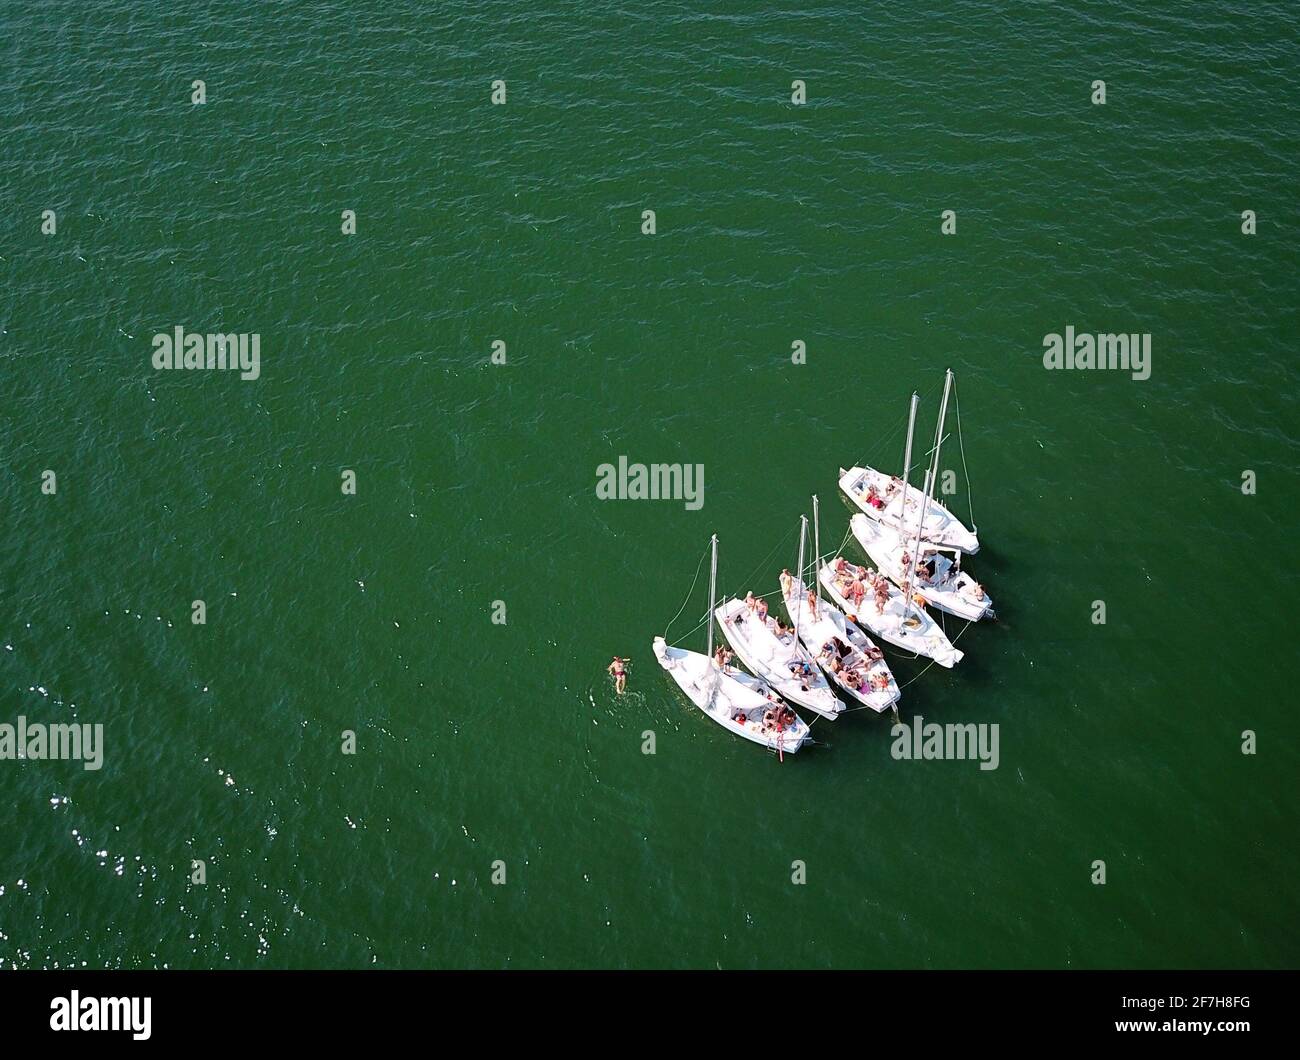 Six small sailing boats tied together for an 'on-lake-party' Stock Photo